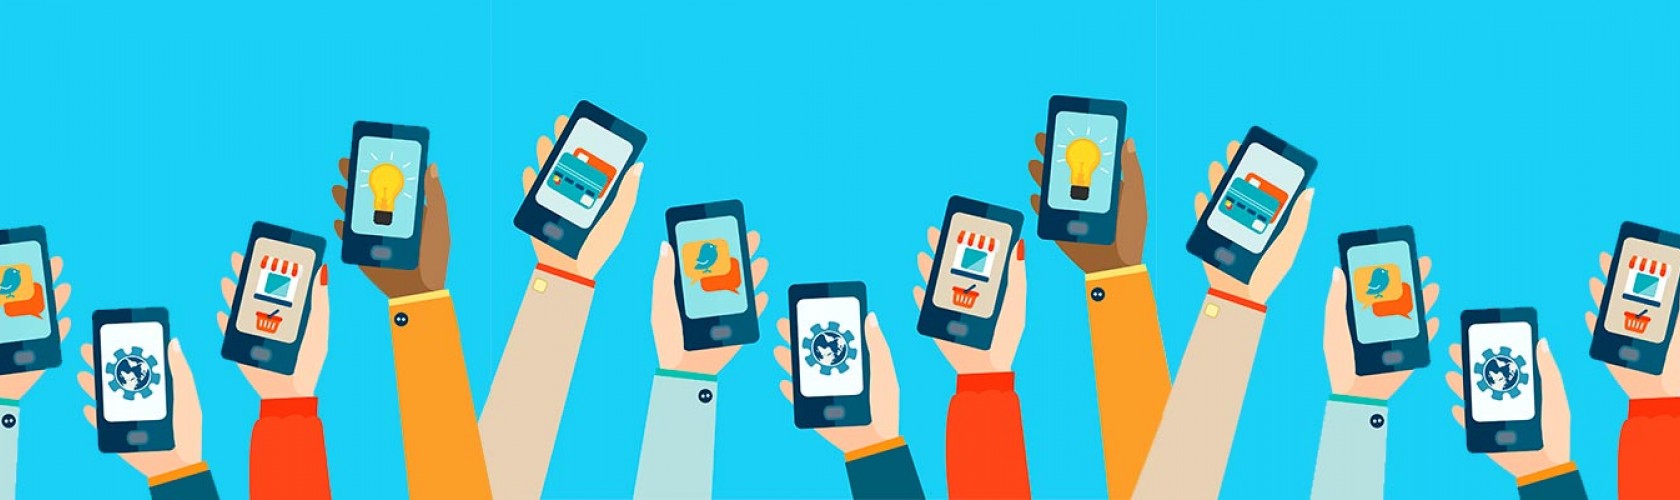 5 Ways to improve your mobile Marketing in 2016